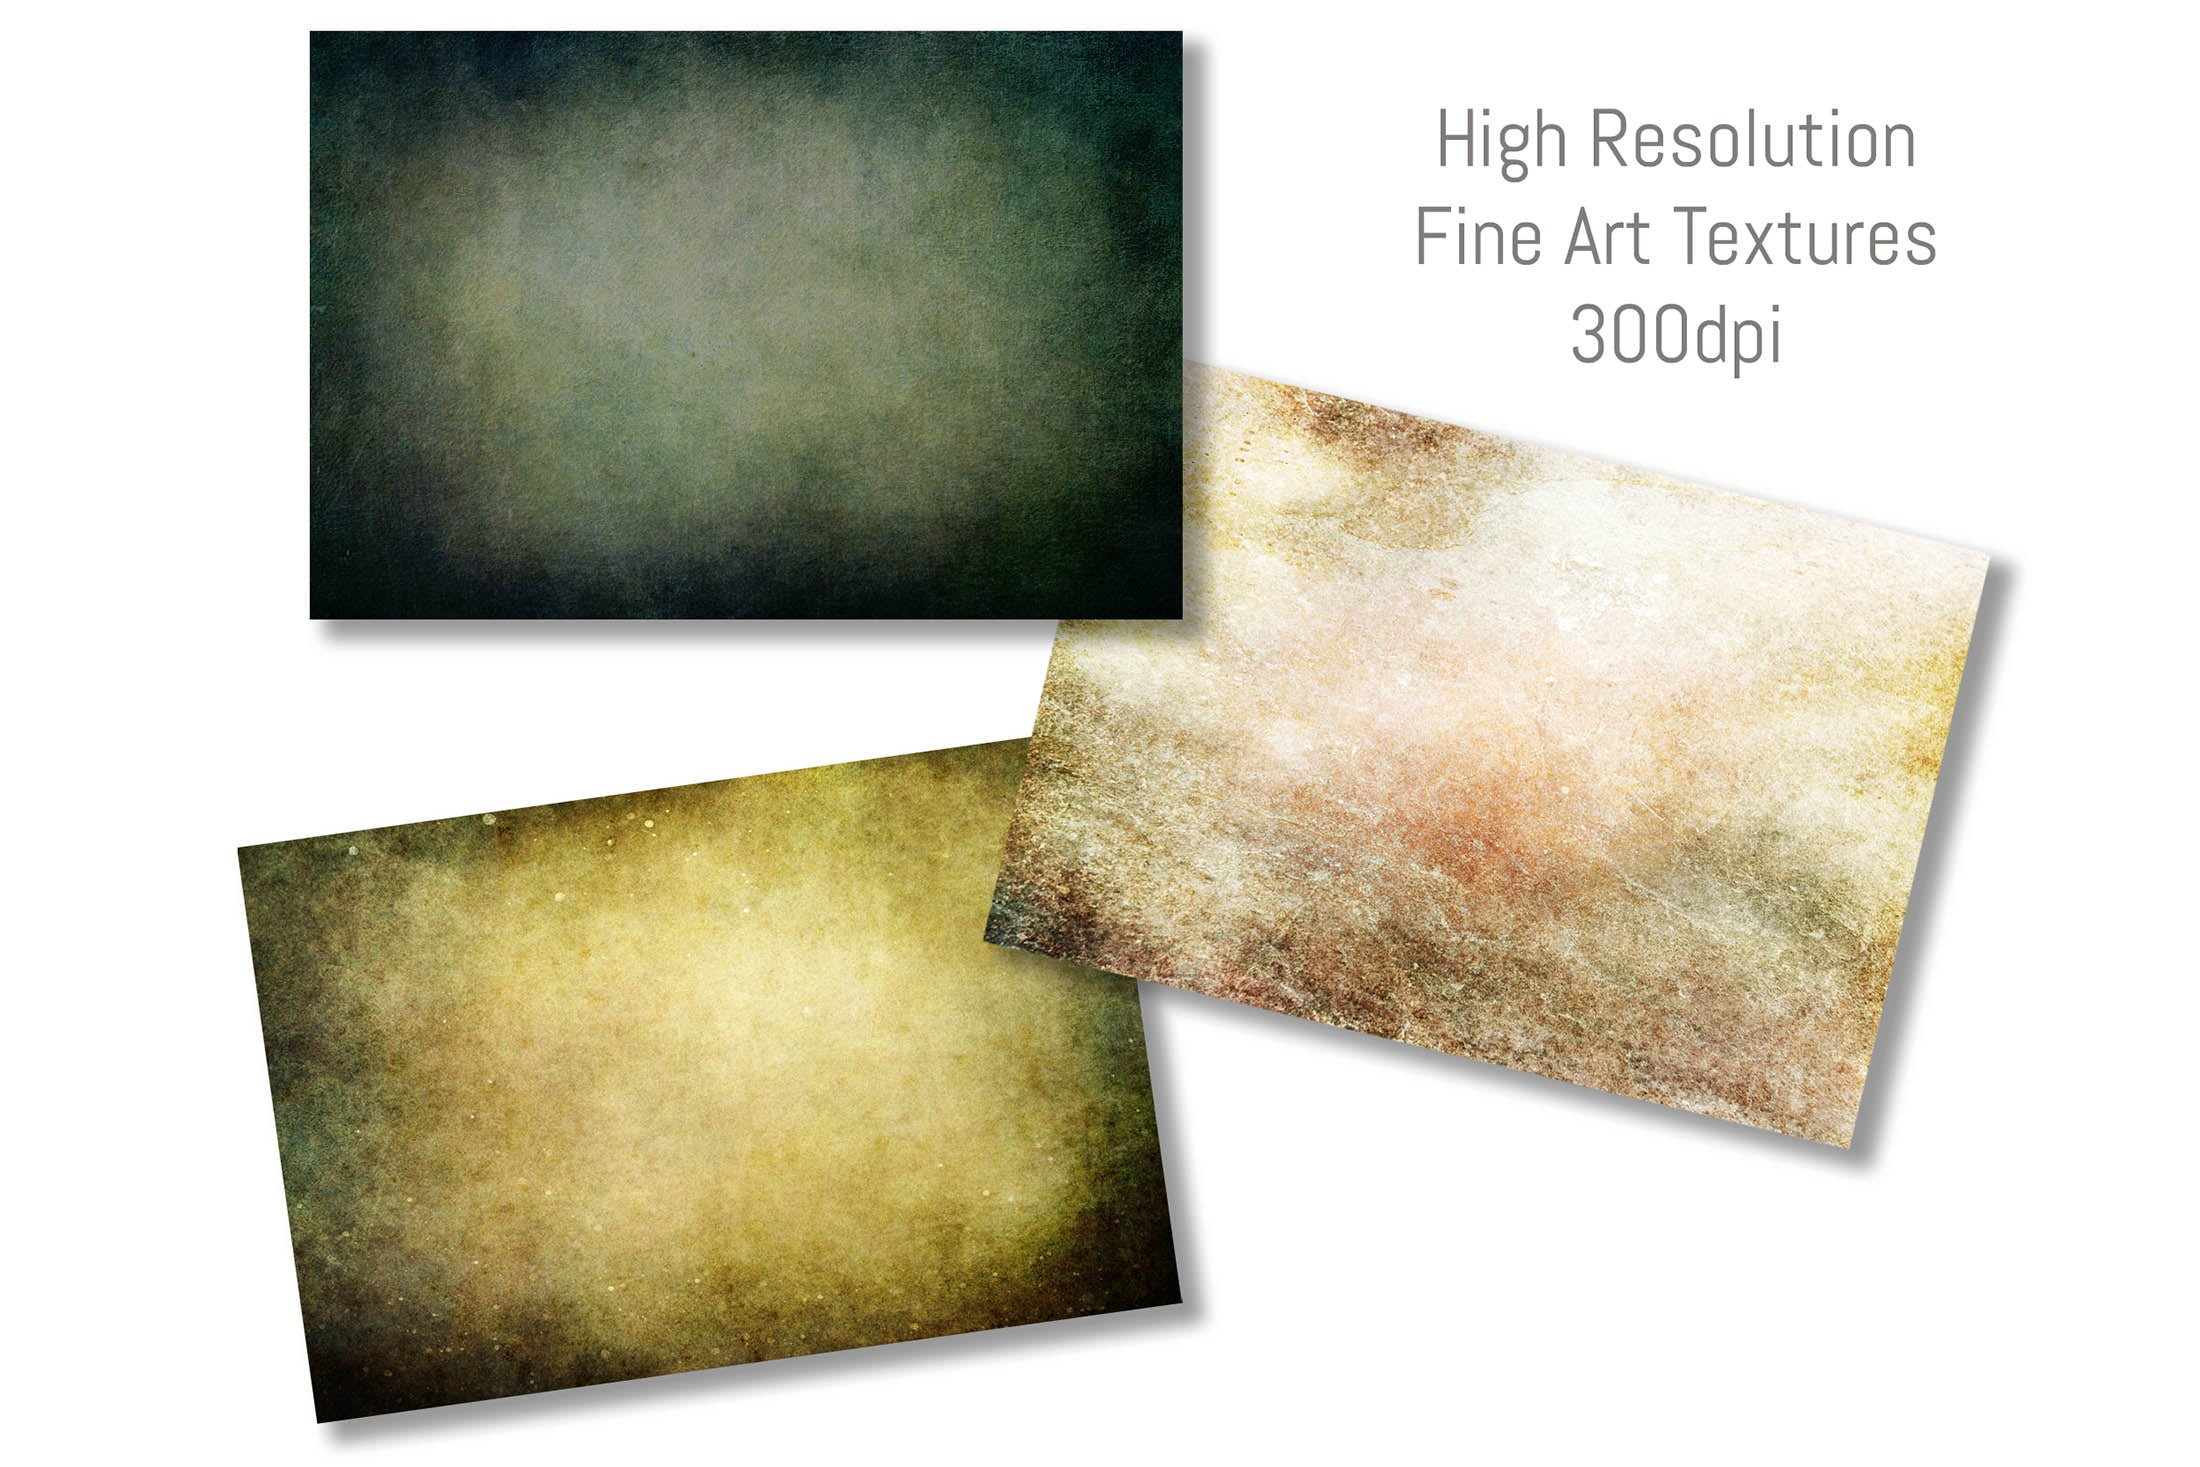 Earth fine art textures. Rich, warm colour tints. Texture for photographers and digital editing. Photo Overlays. Antique, Vintage, Grunge, Light, Dark Bundle. Textured printable Canvas, Colour, Monochrome, Bundle. High resolution, 300dpi Graphic Assets for photography, digital scrapbooking and design. By ATP Textures